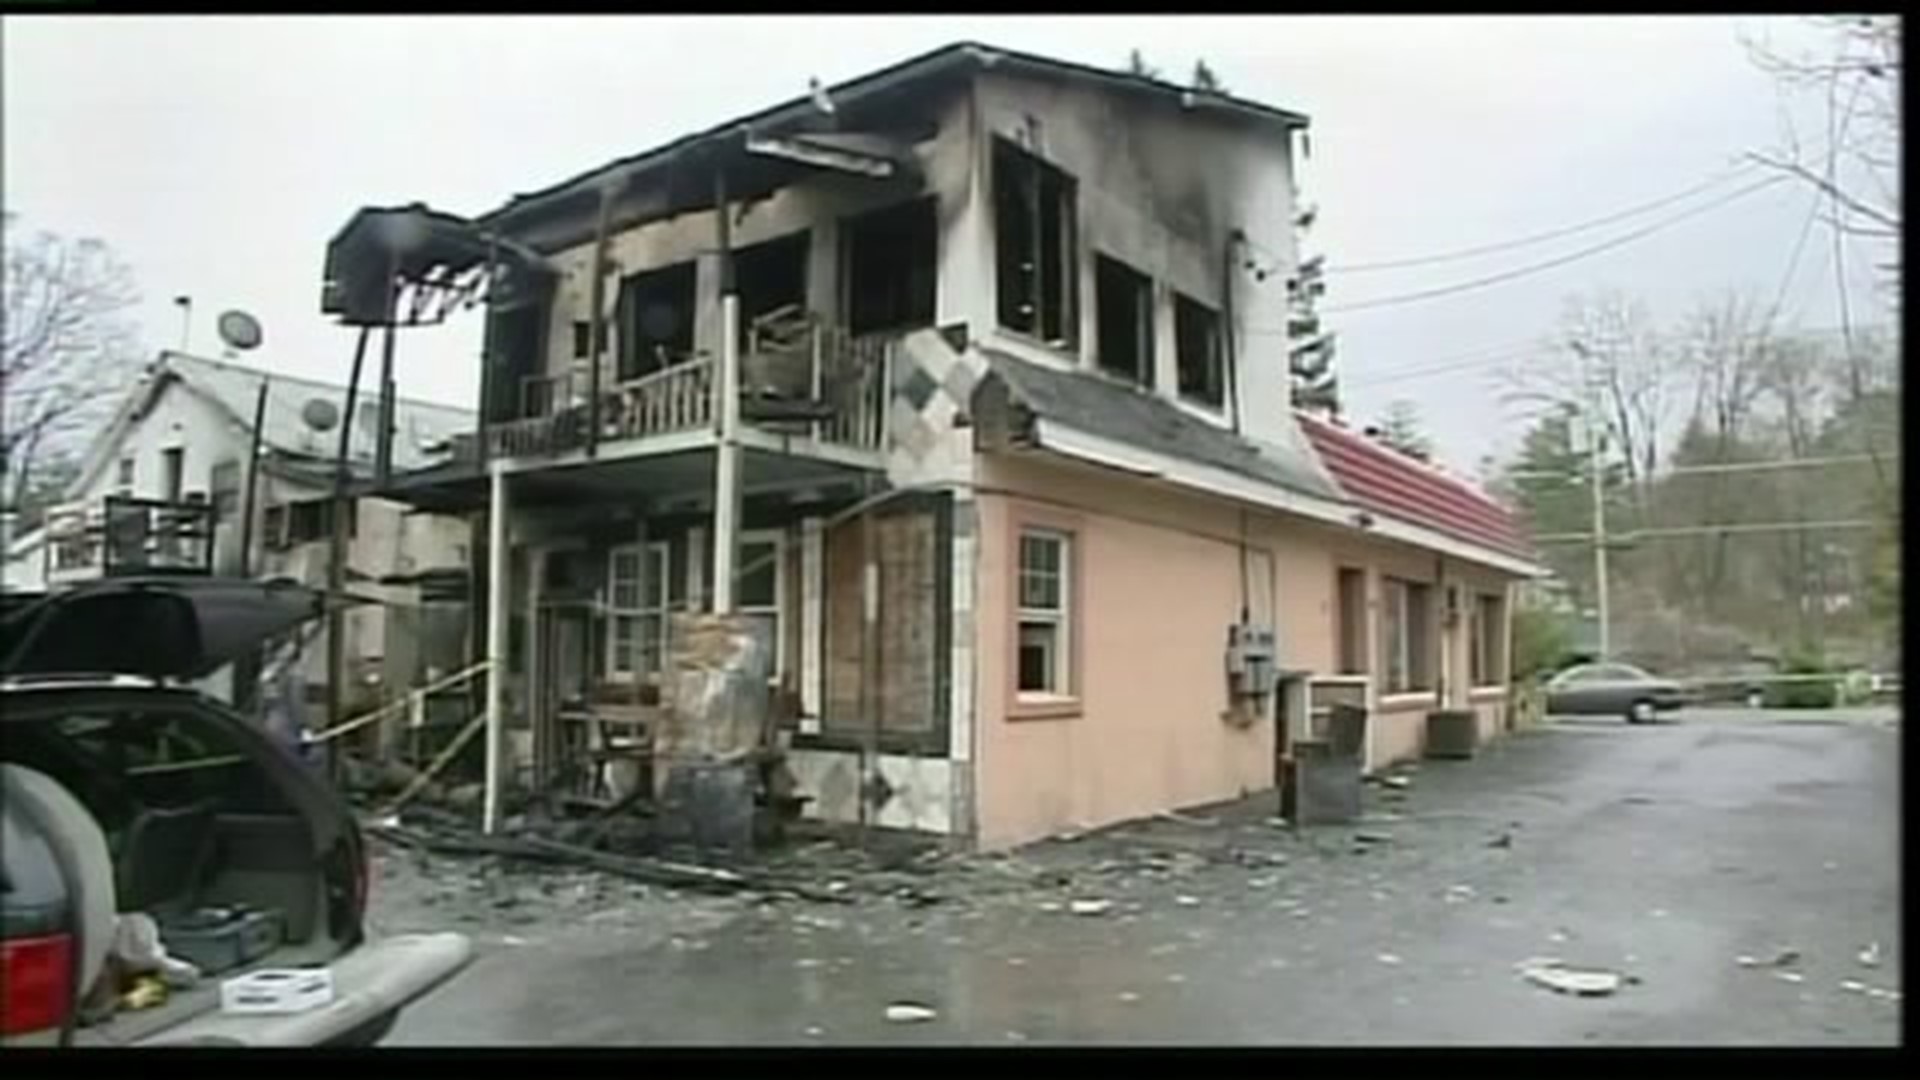 Deadly Arson Case Closed, Only Suspect Dead